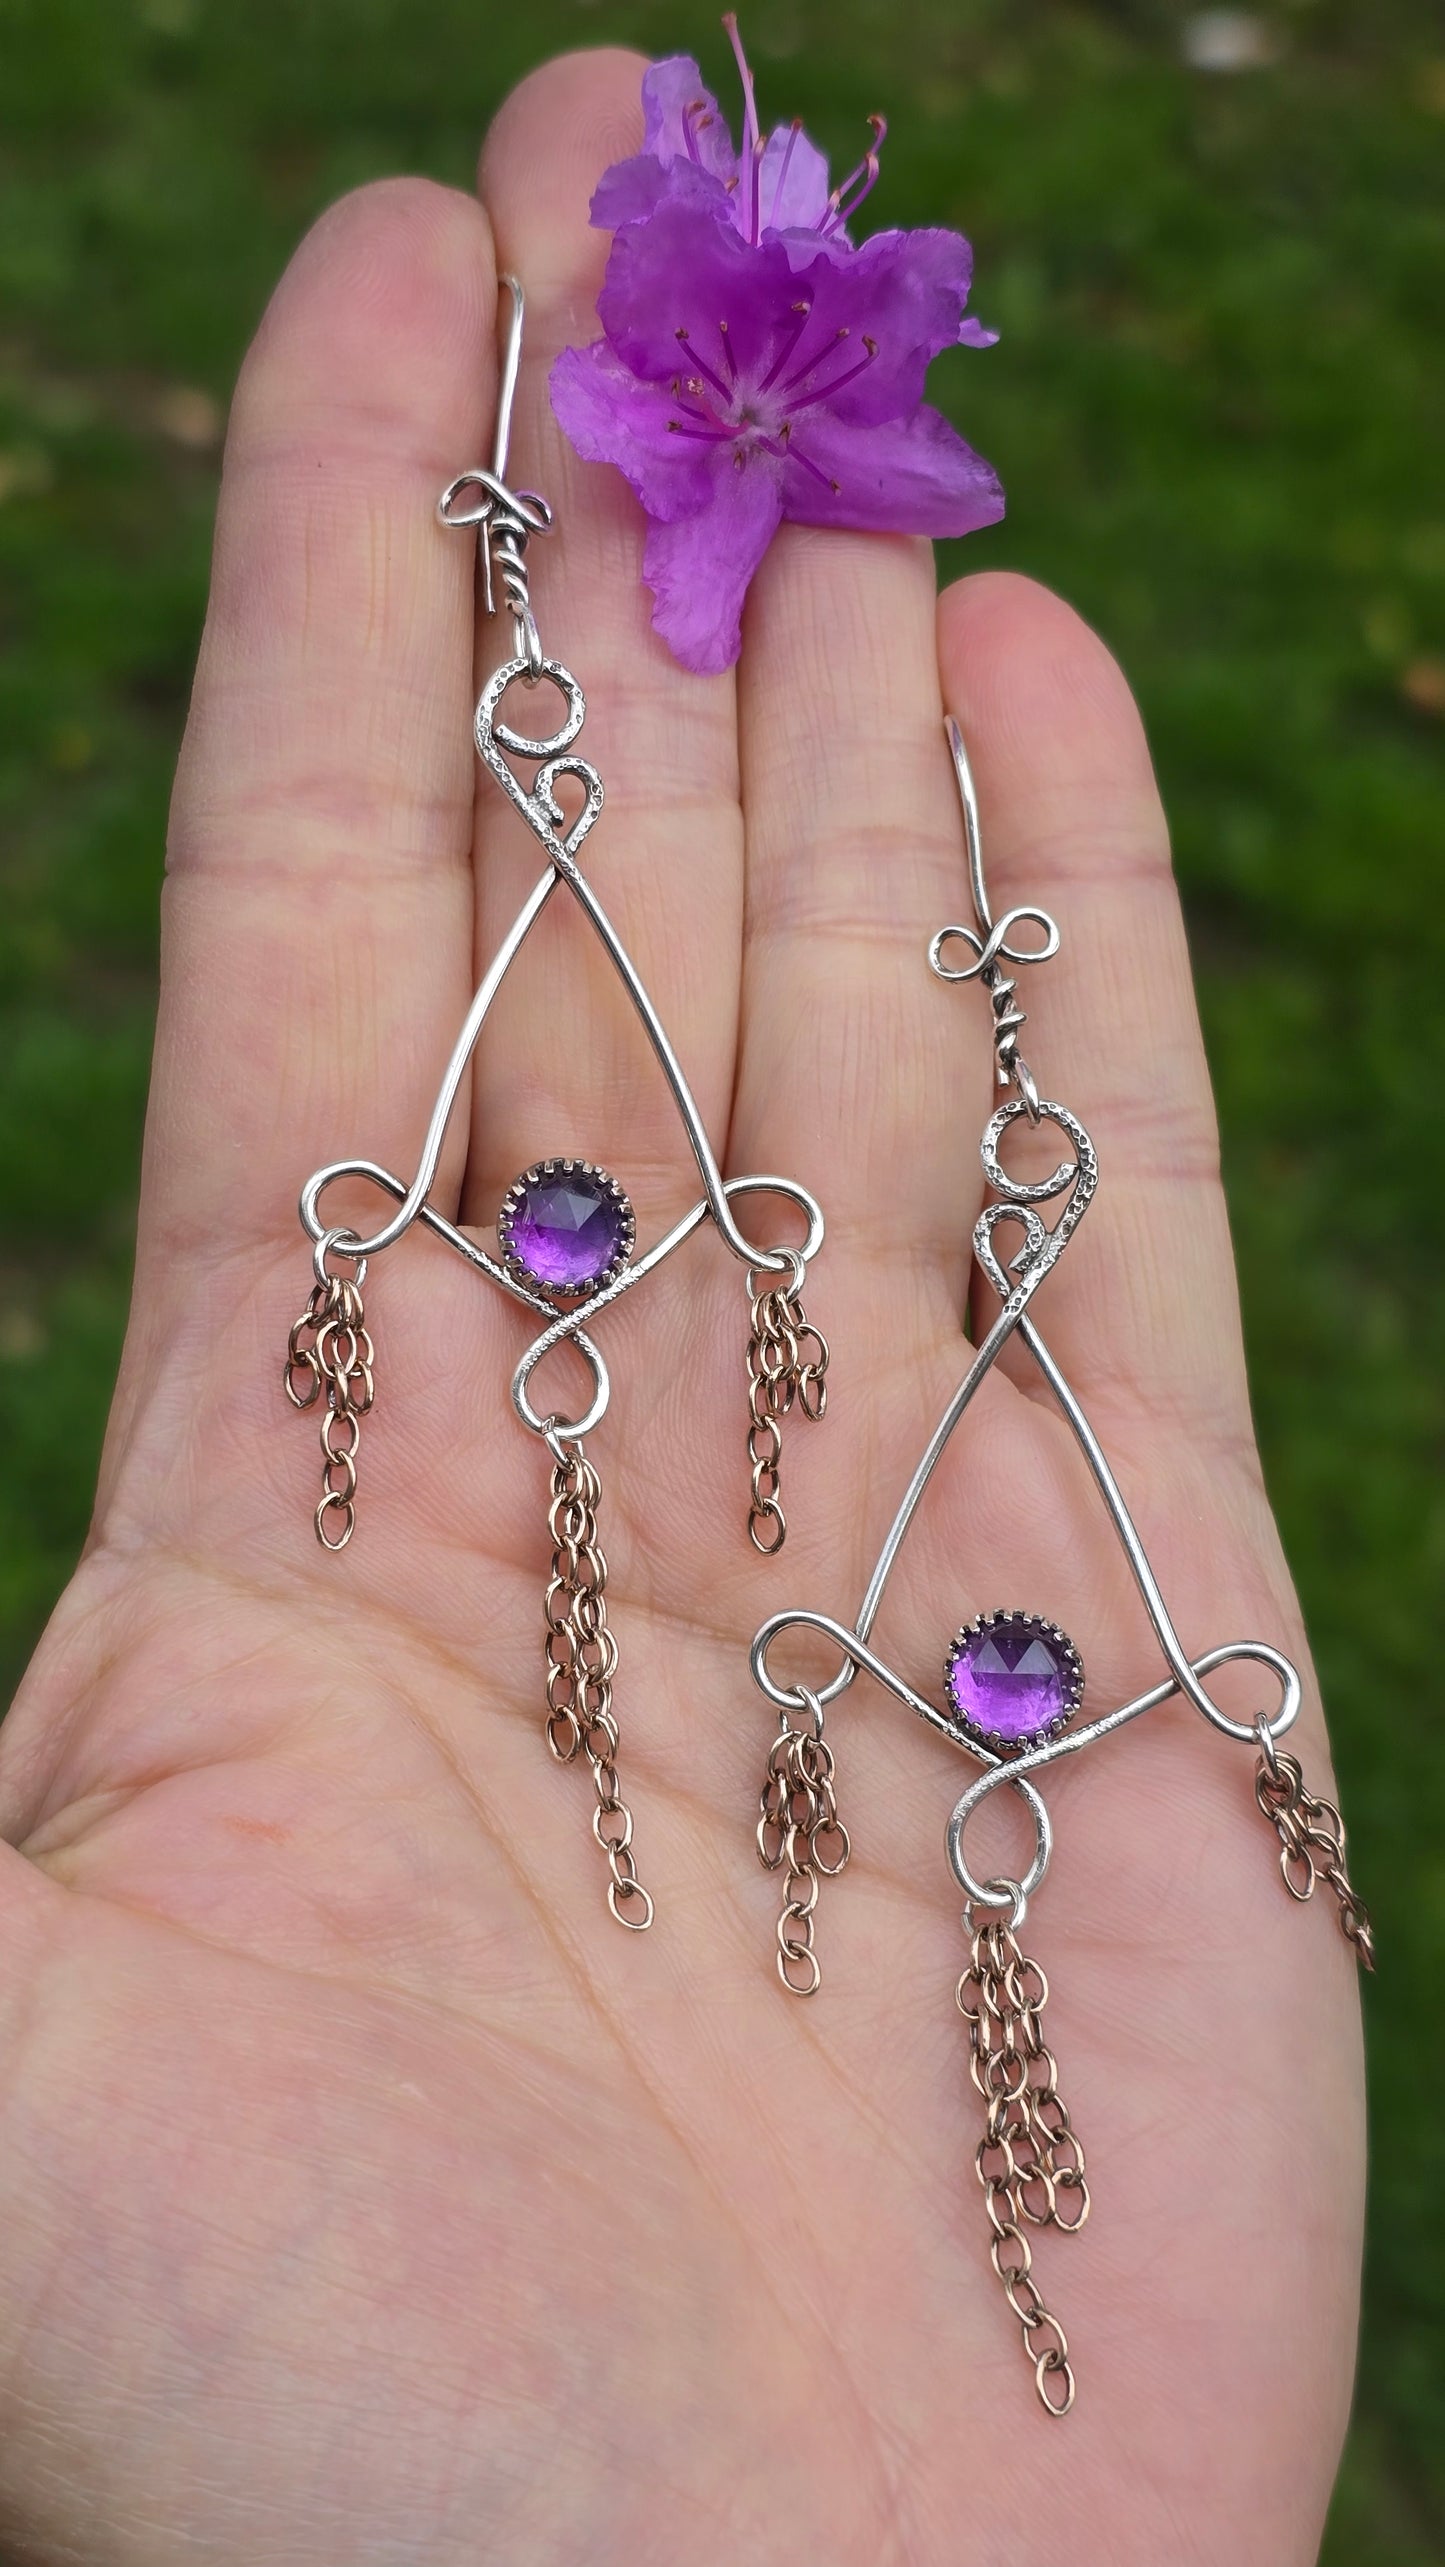 SPRING RAIN Earrings- Rose Cut Amethyst in Fine and Sterling Silver with Bronze Chain Fringe